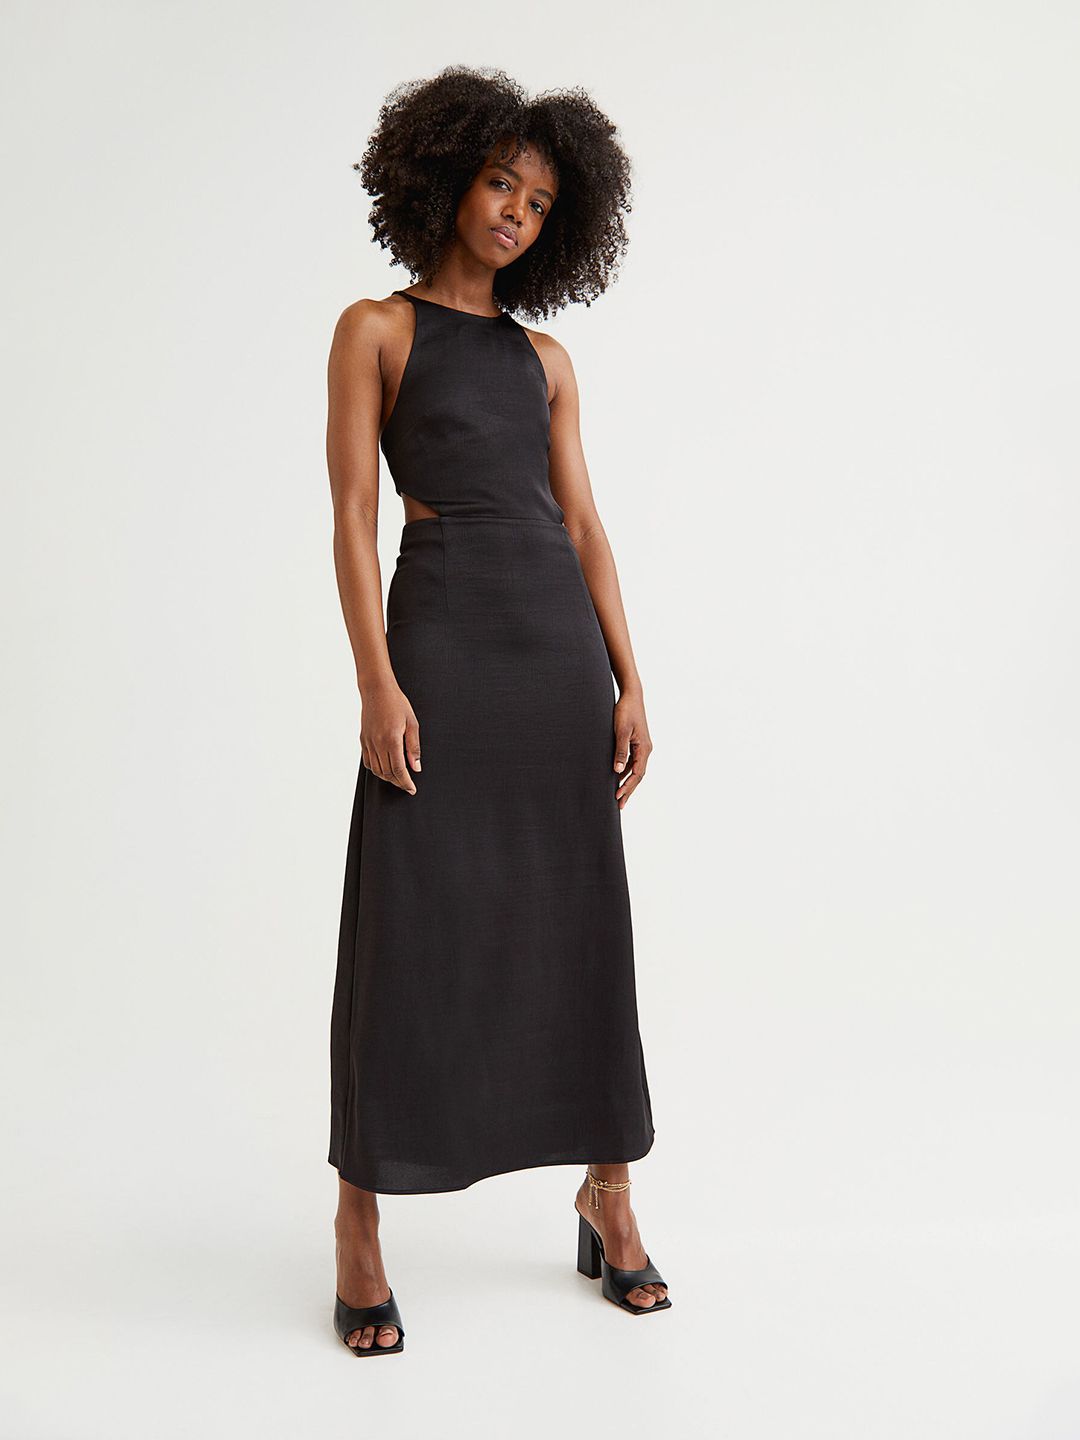 H&M Black Solid Open-Backed Dress Price in India